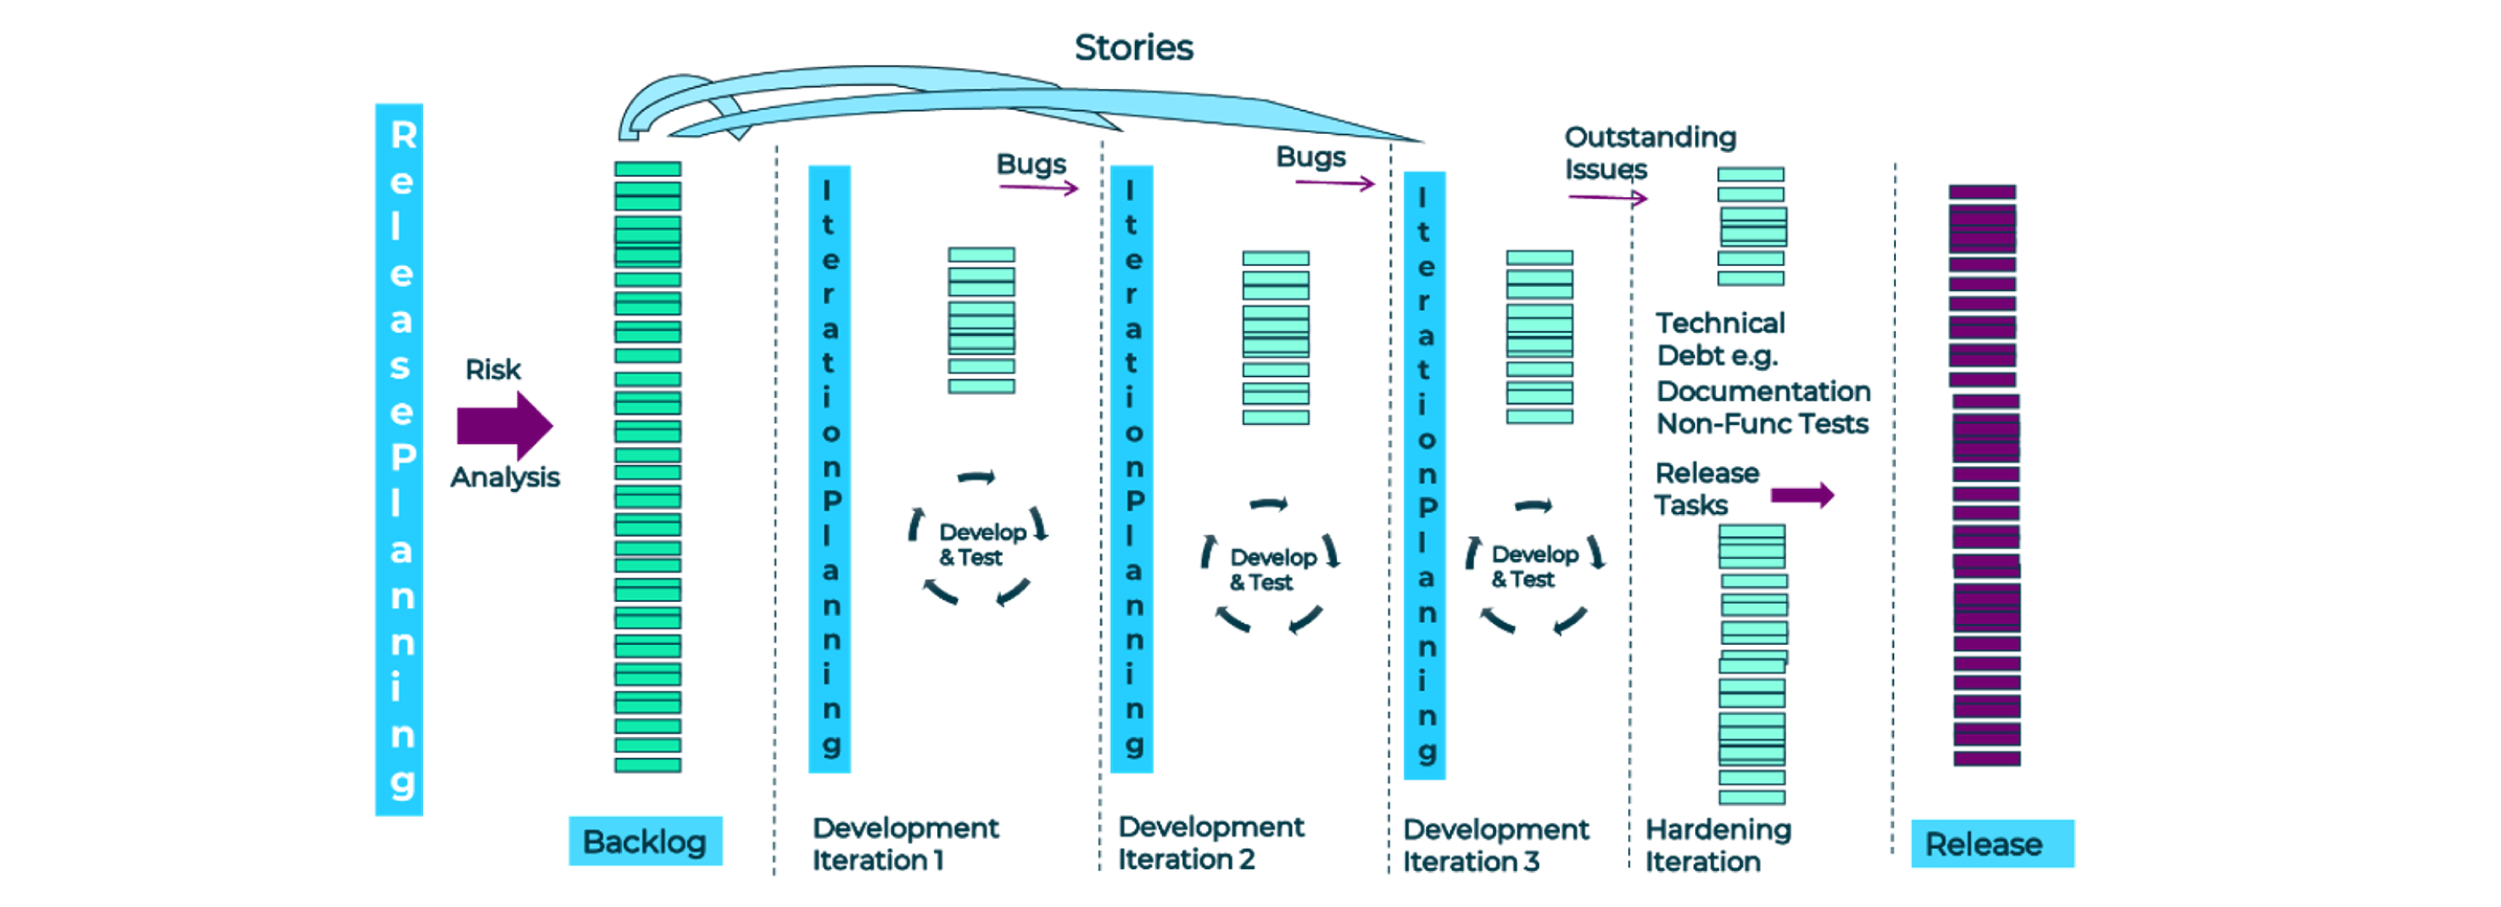 A diagram showing requirements in the backlog passing through four iterations of development, with development and testing happening within each iteration, before reaching the final ‘hardening iteration’ and release.